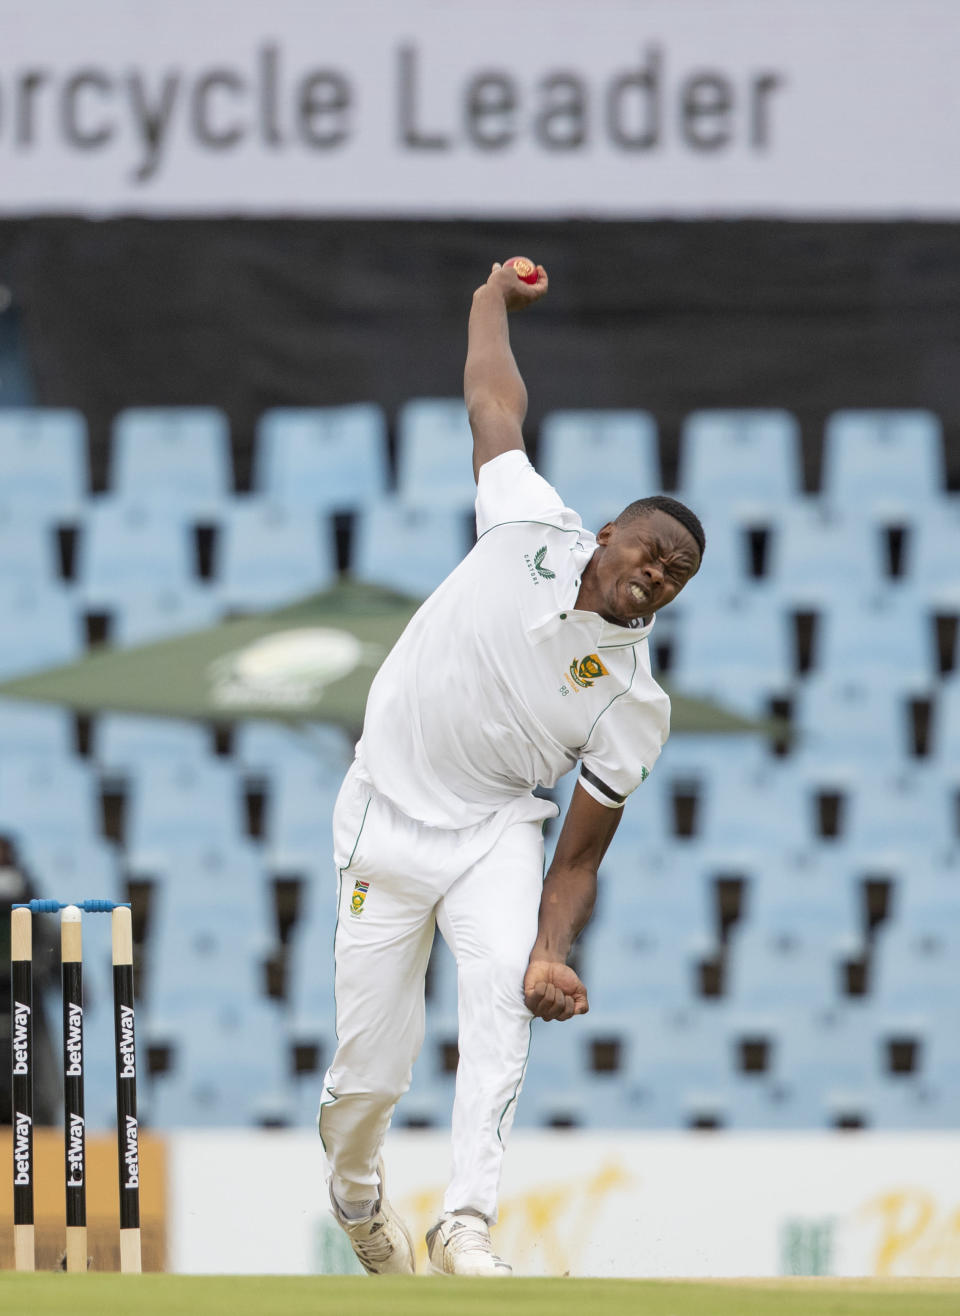 South Africa's Kagiso Rabada bowls during the Test Cricket match between South Africa and India at Centurion Park in Pretoria, South Africa, Sunday, Dec. 26, 2021. (AP Photo/Themba Hadebe)